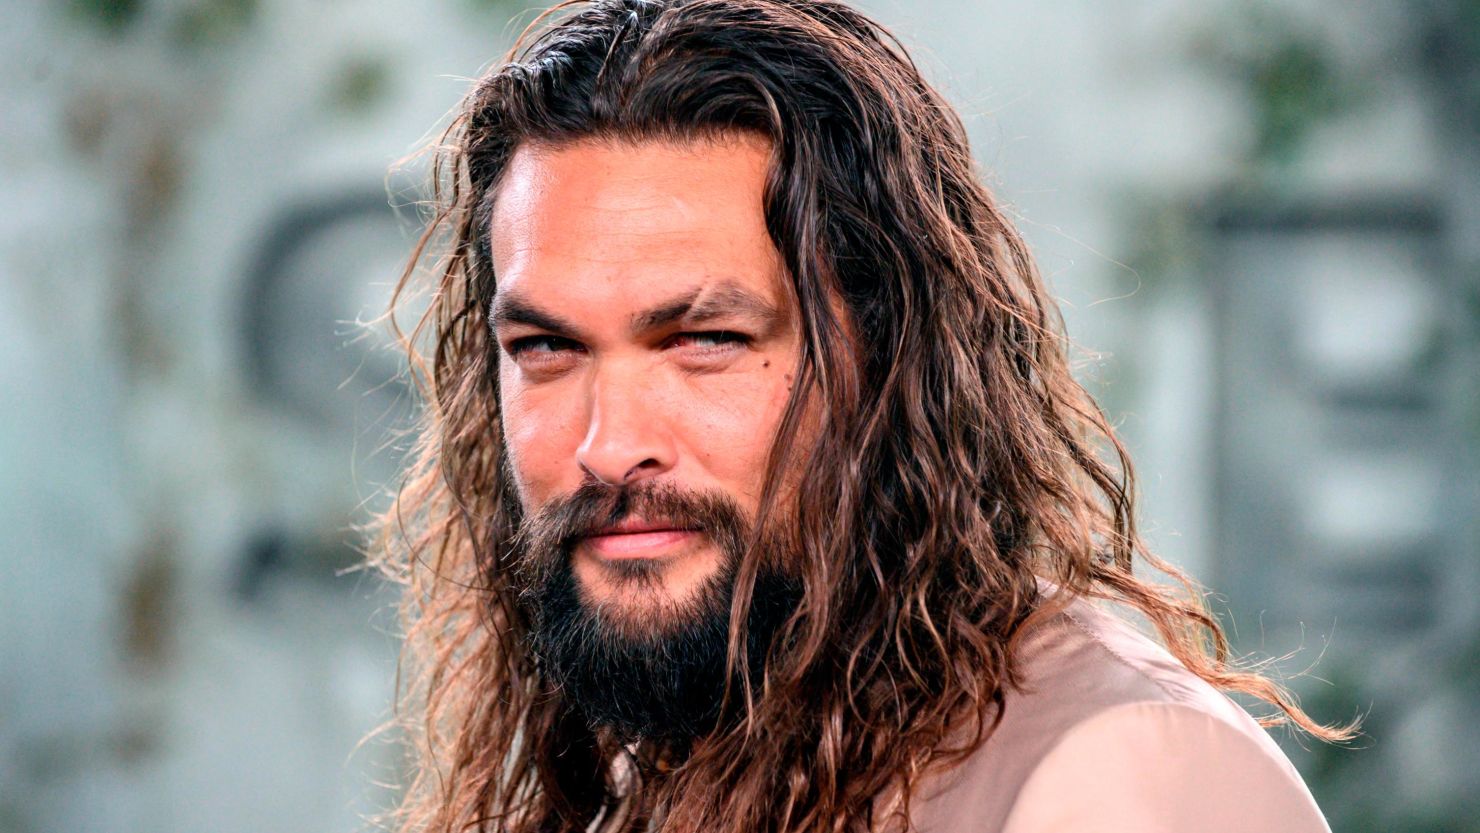 Actor Jason Momoa, seen here arriving for the Apple TV+ premiere of "SEE" in Los Angeles on October 21, 2019, is in London to begin filming the sequel to "Aquaman."